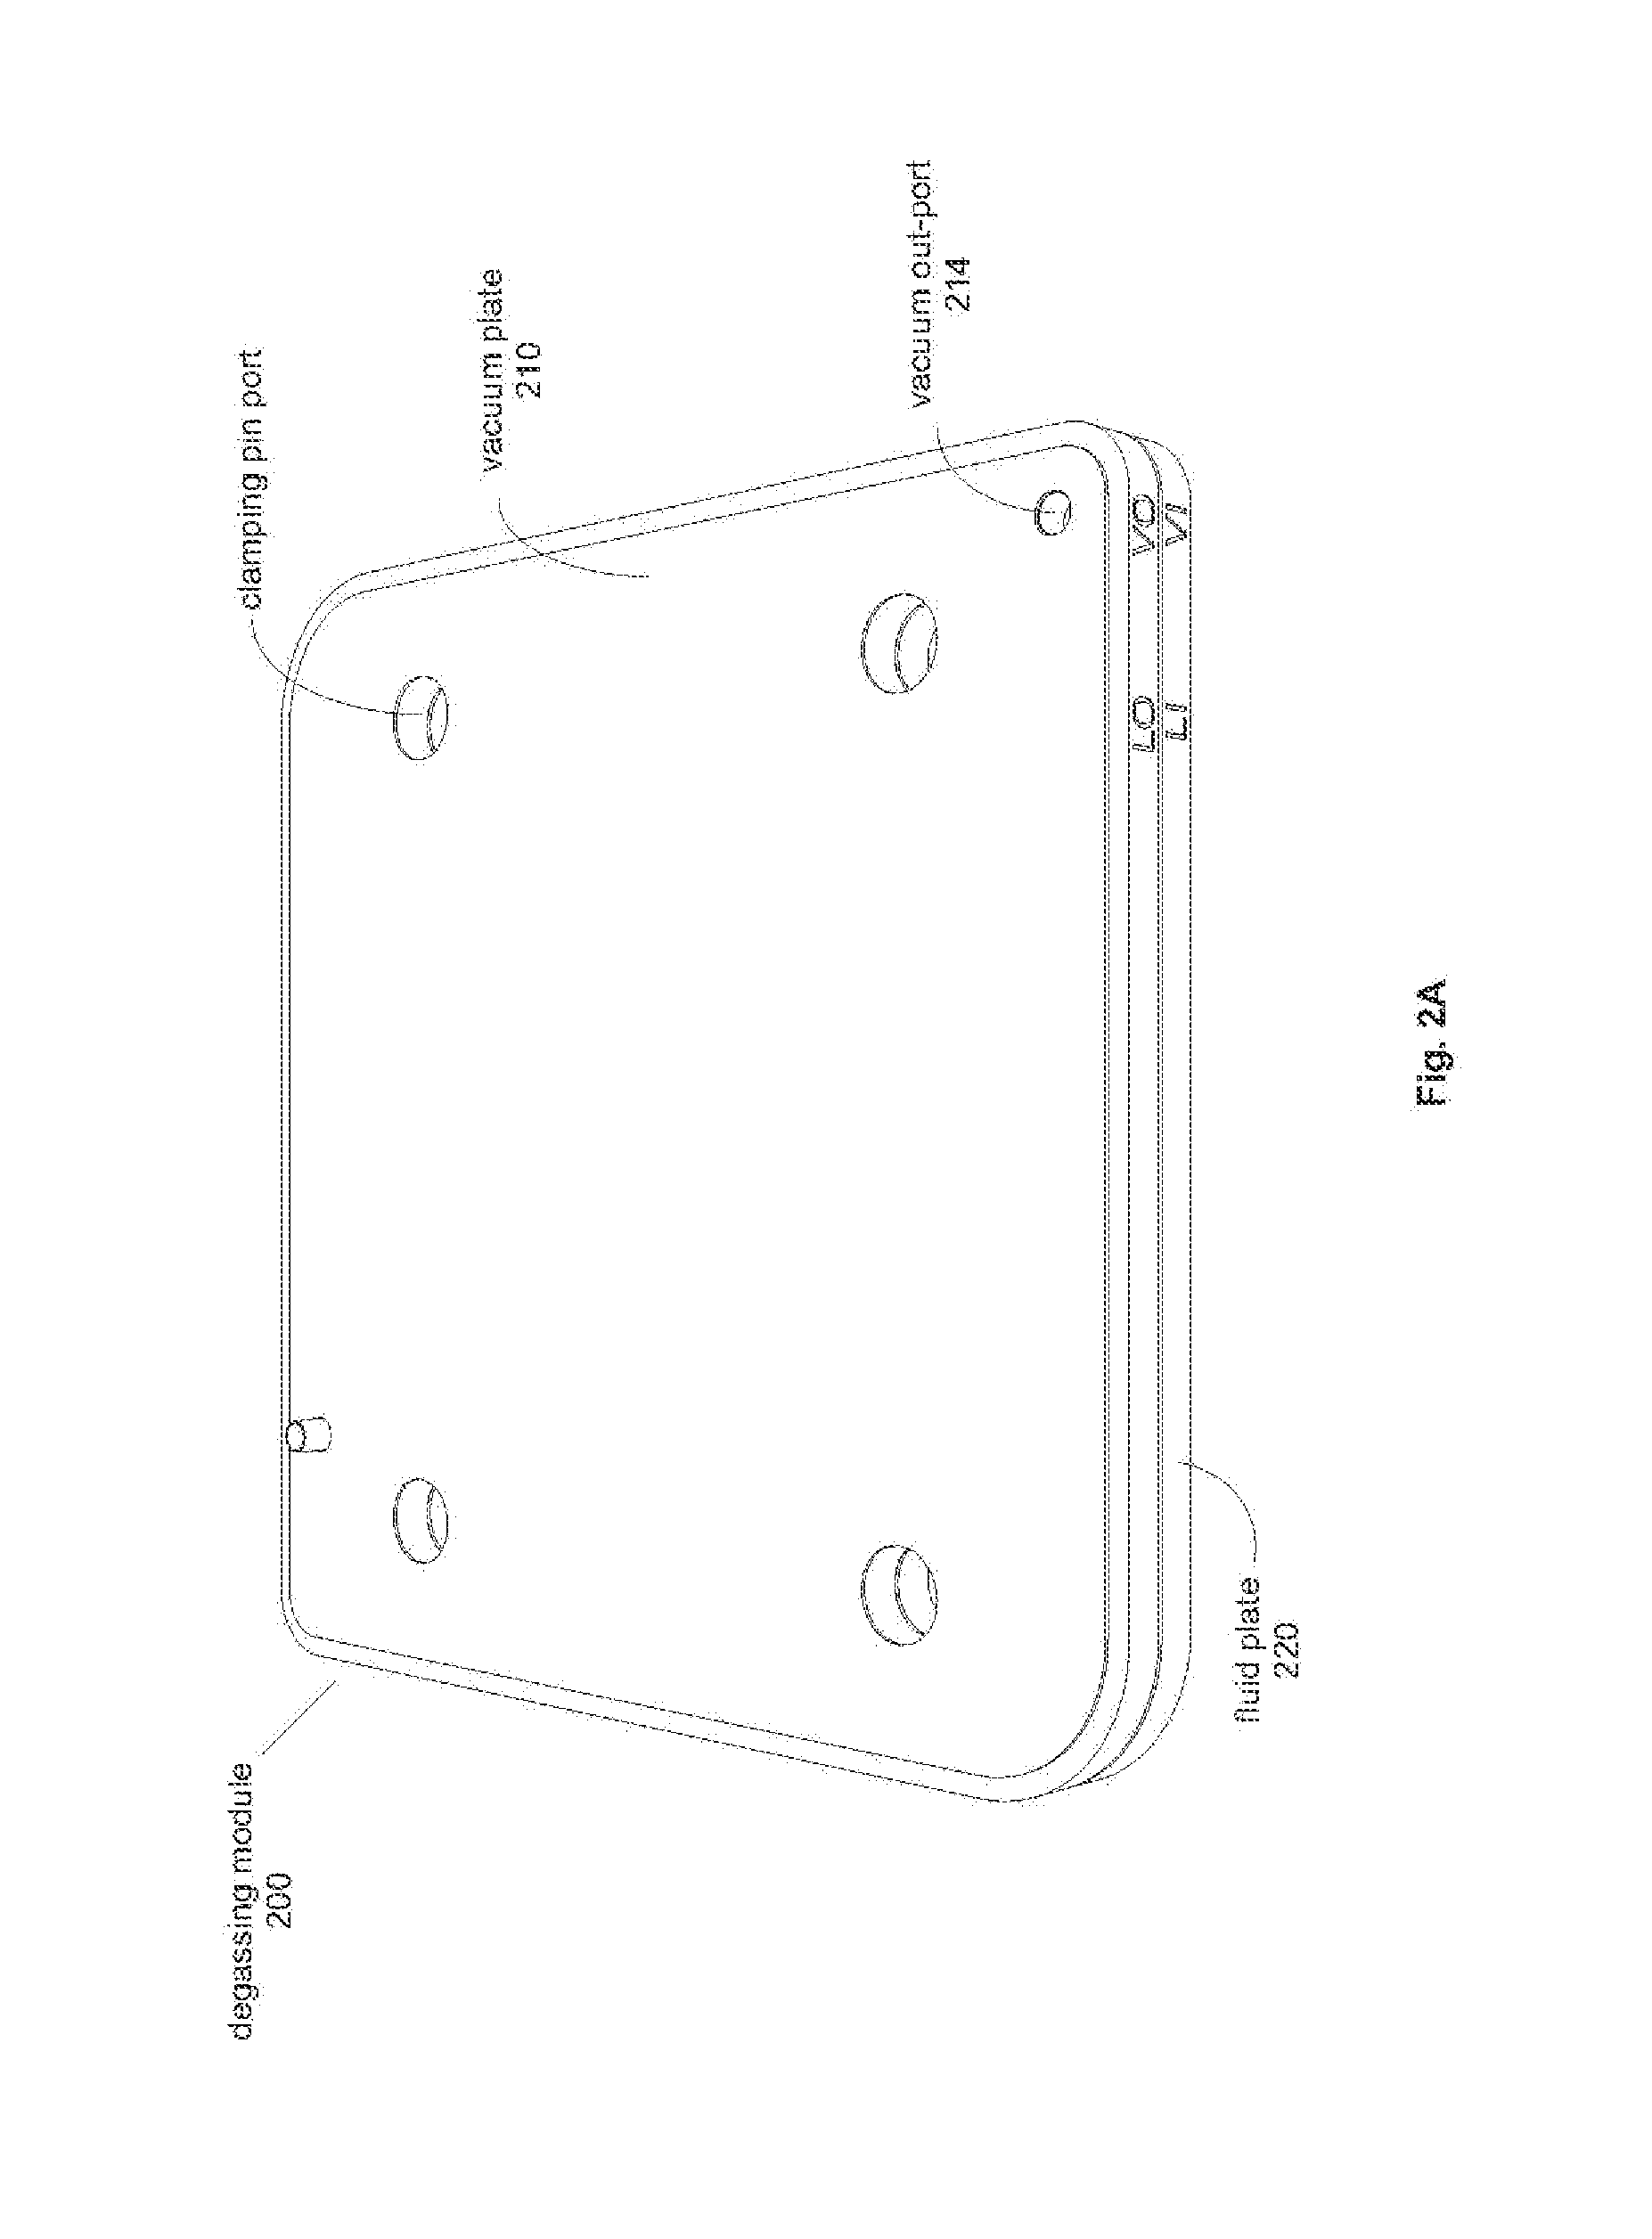 Device and Method for Degassing of Liquids